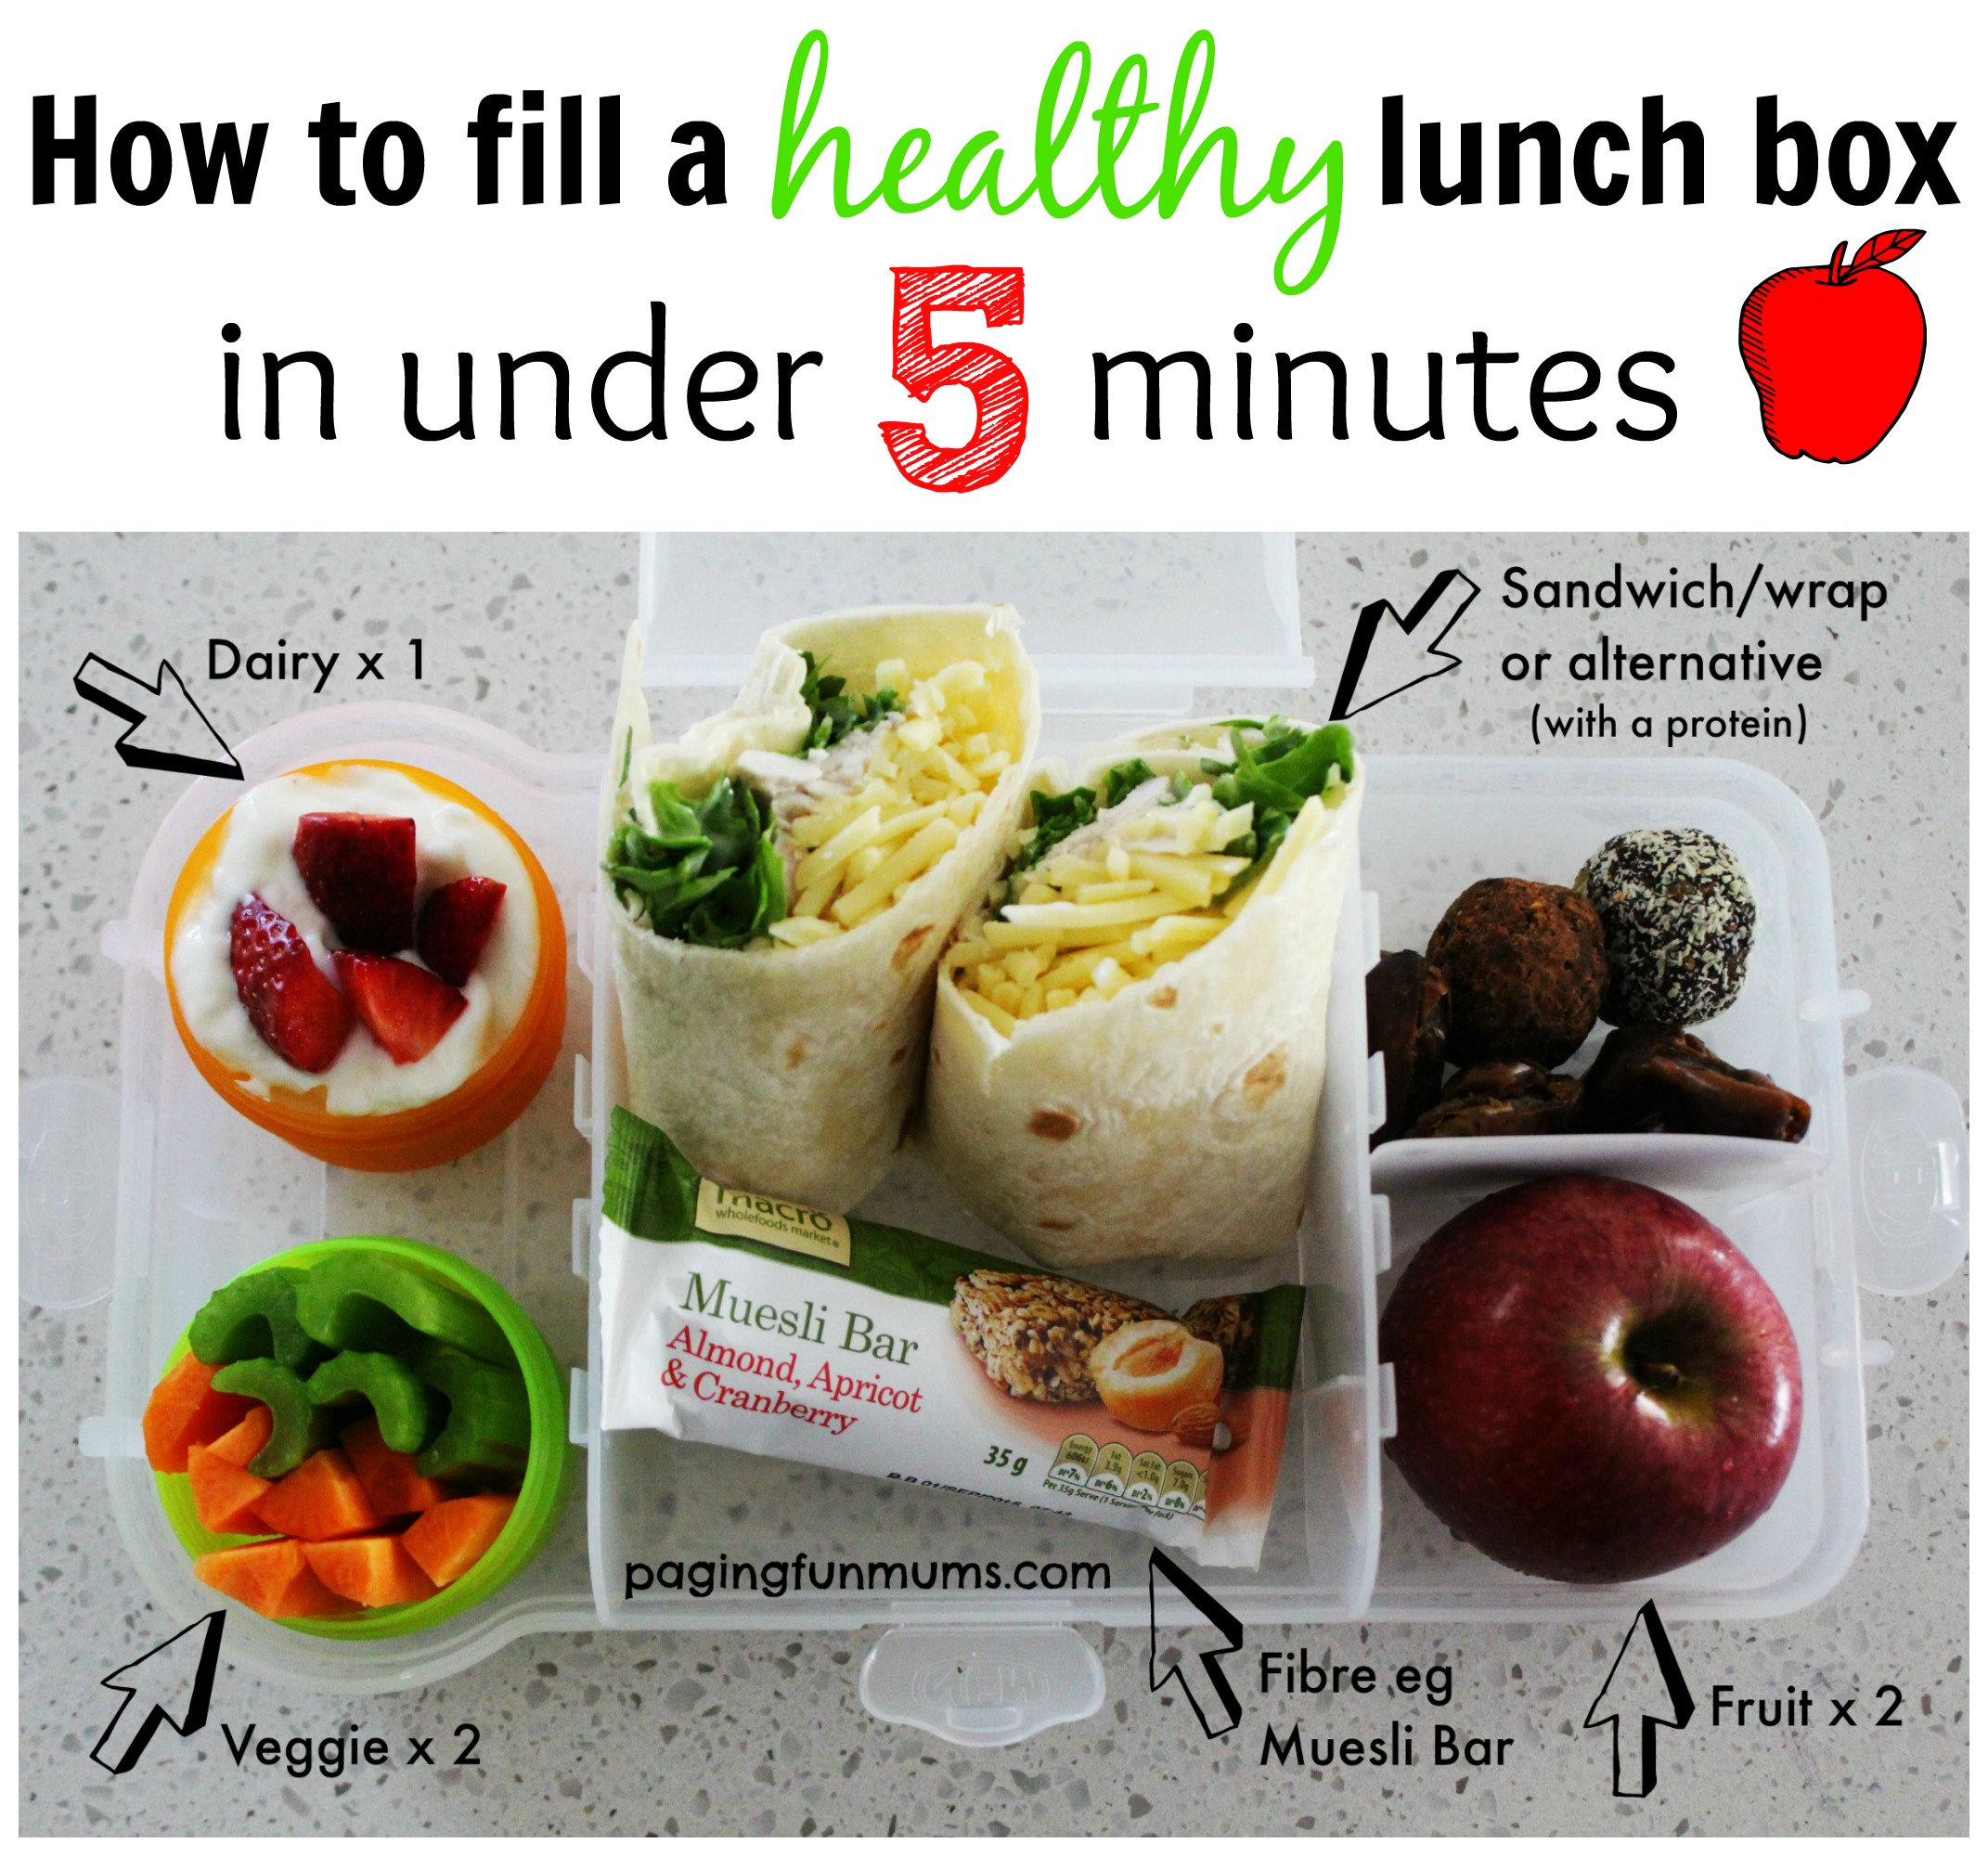 How to Create a Healthy Lunch Box in 5 Steps